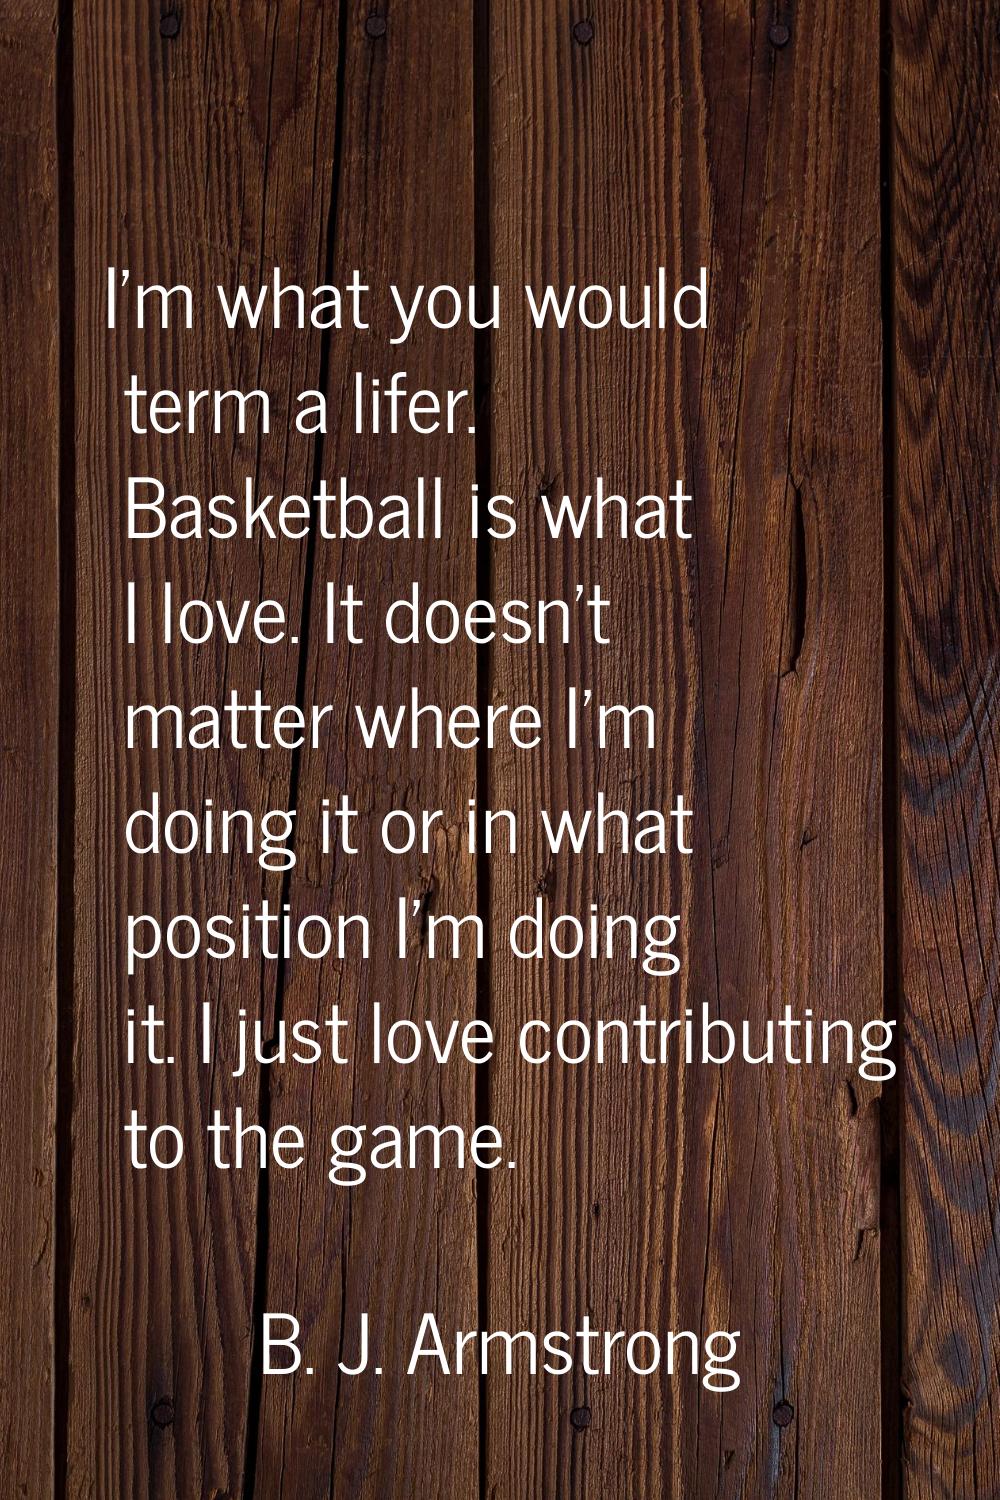 I'm what you would term a lifer. Basketball is what I love. It doesn't matter where I'm doing it or